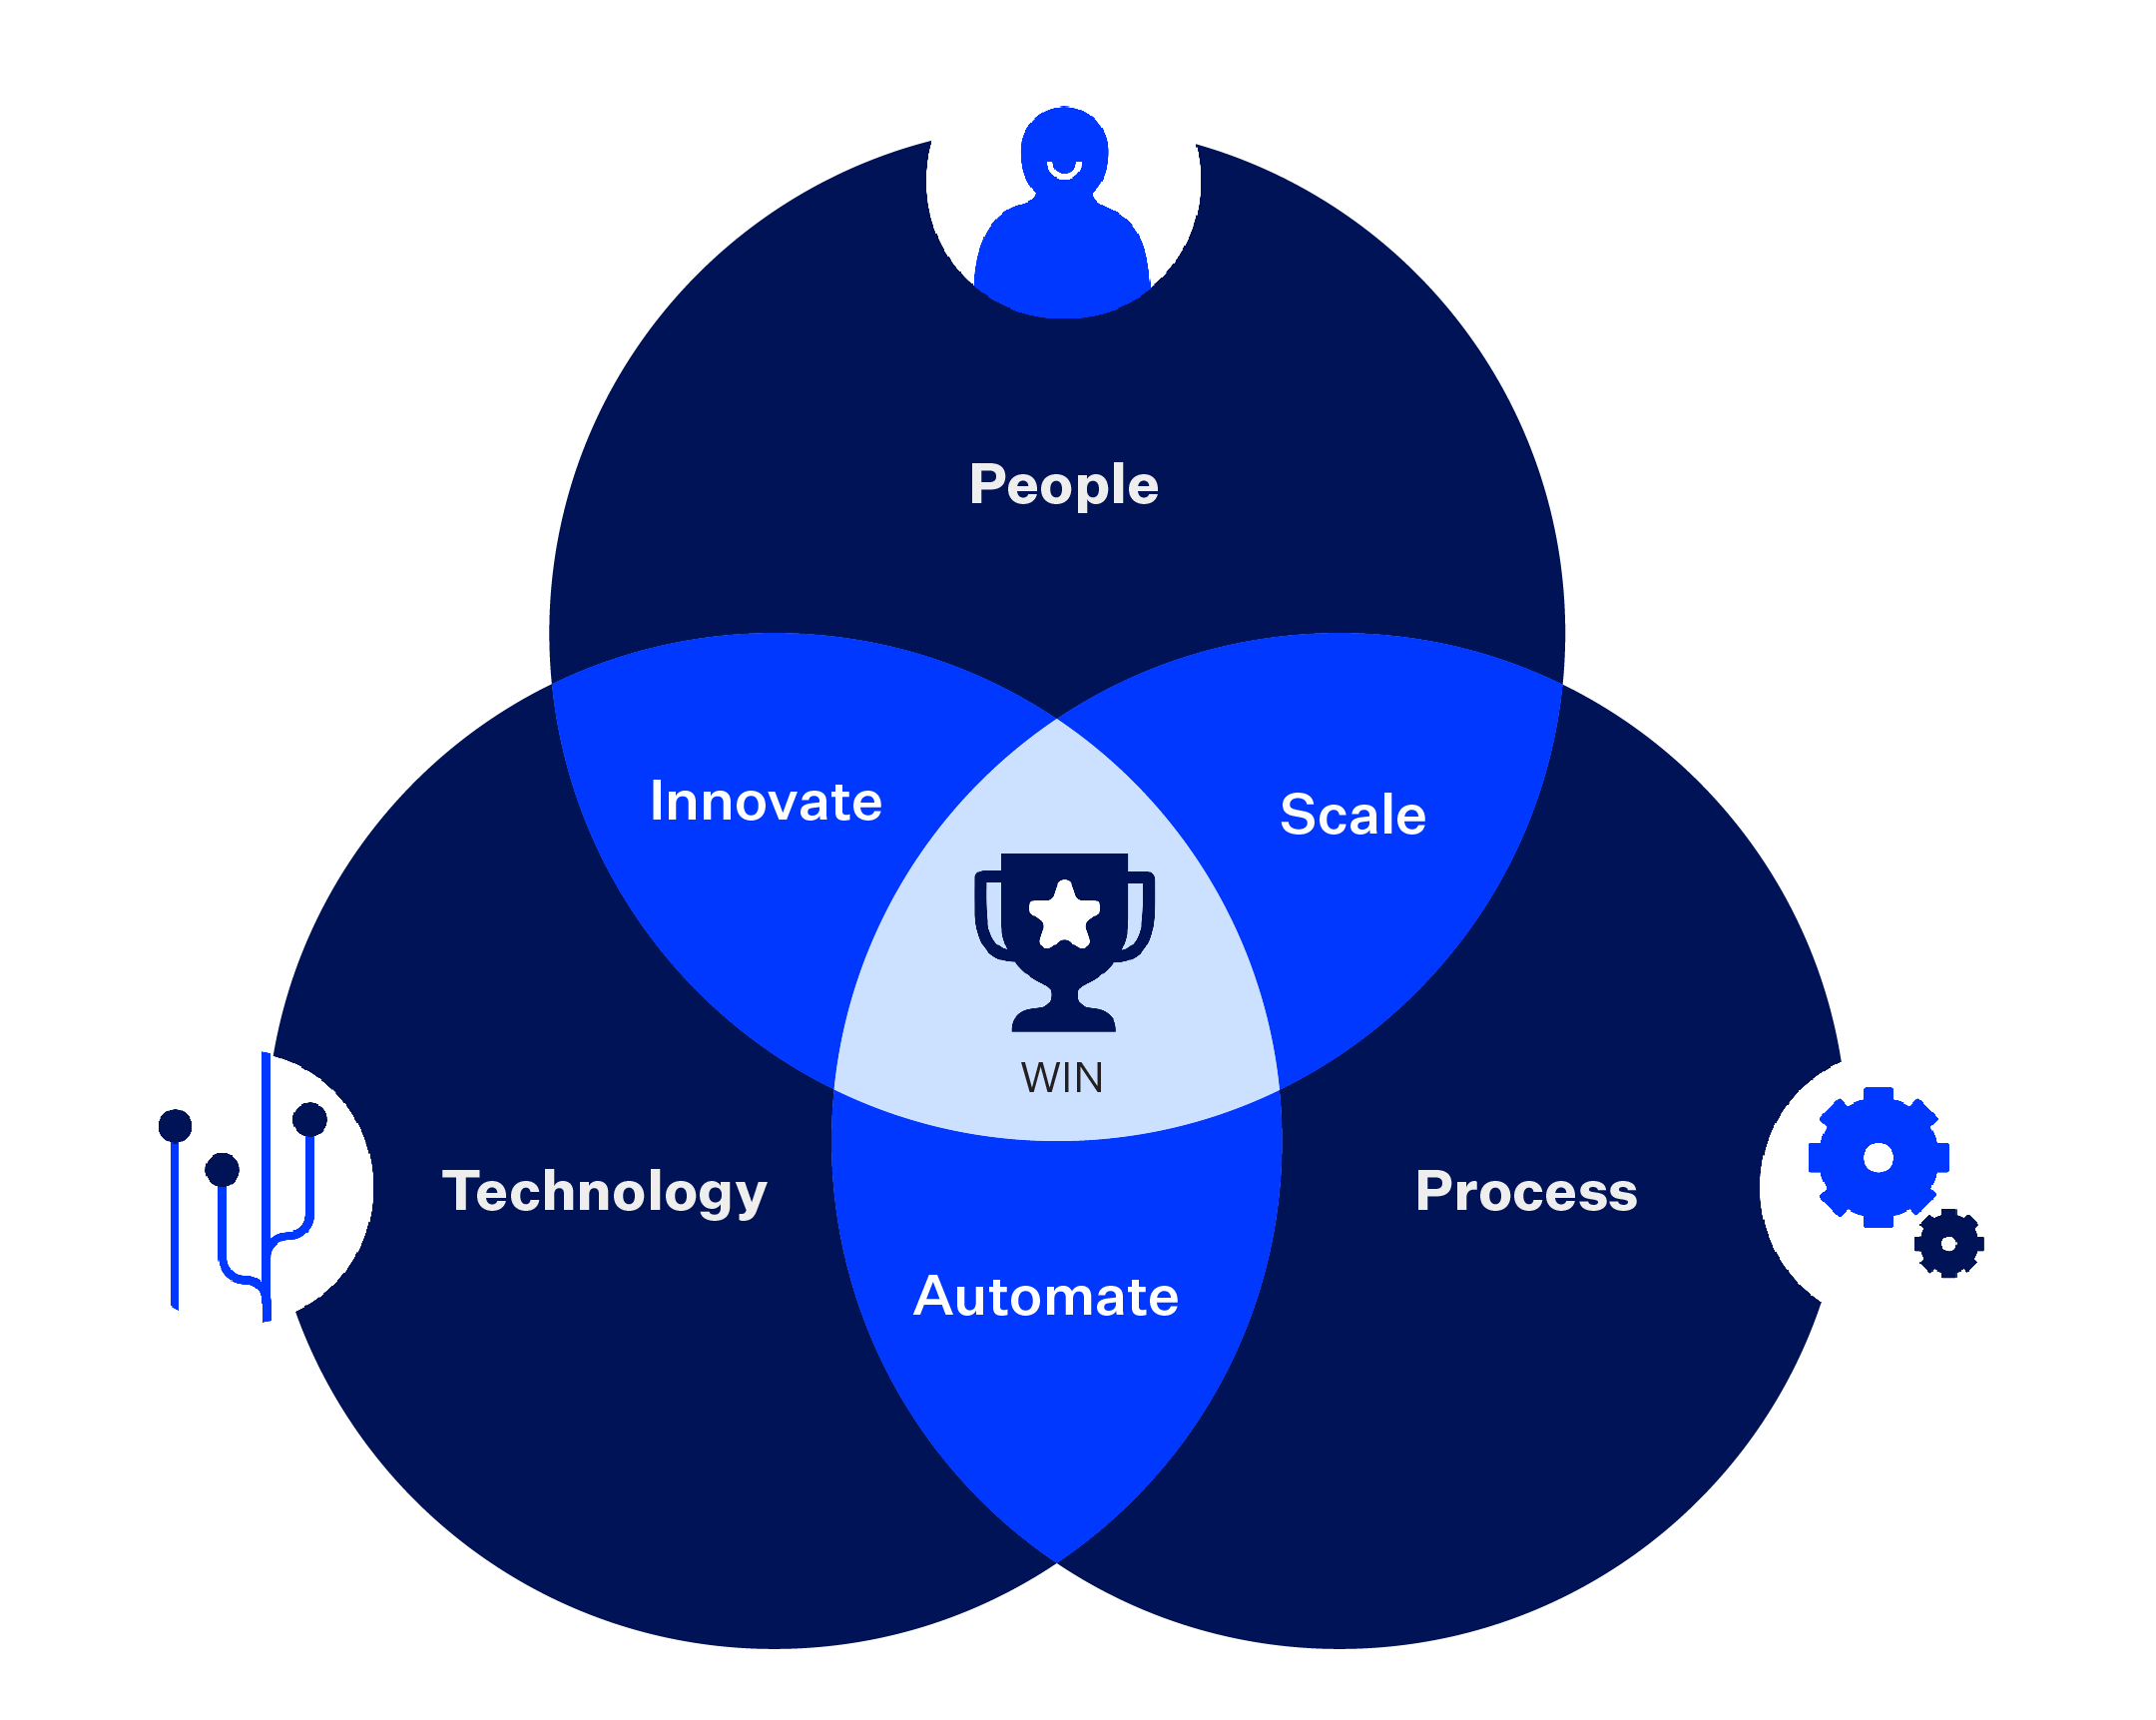 Diagram depicting the relationship between people, technology, and processes